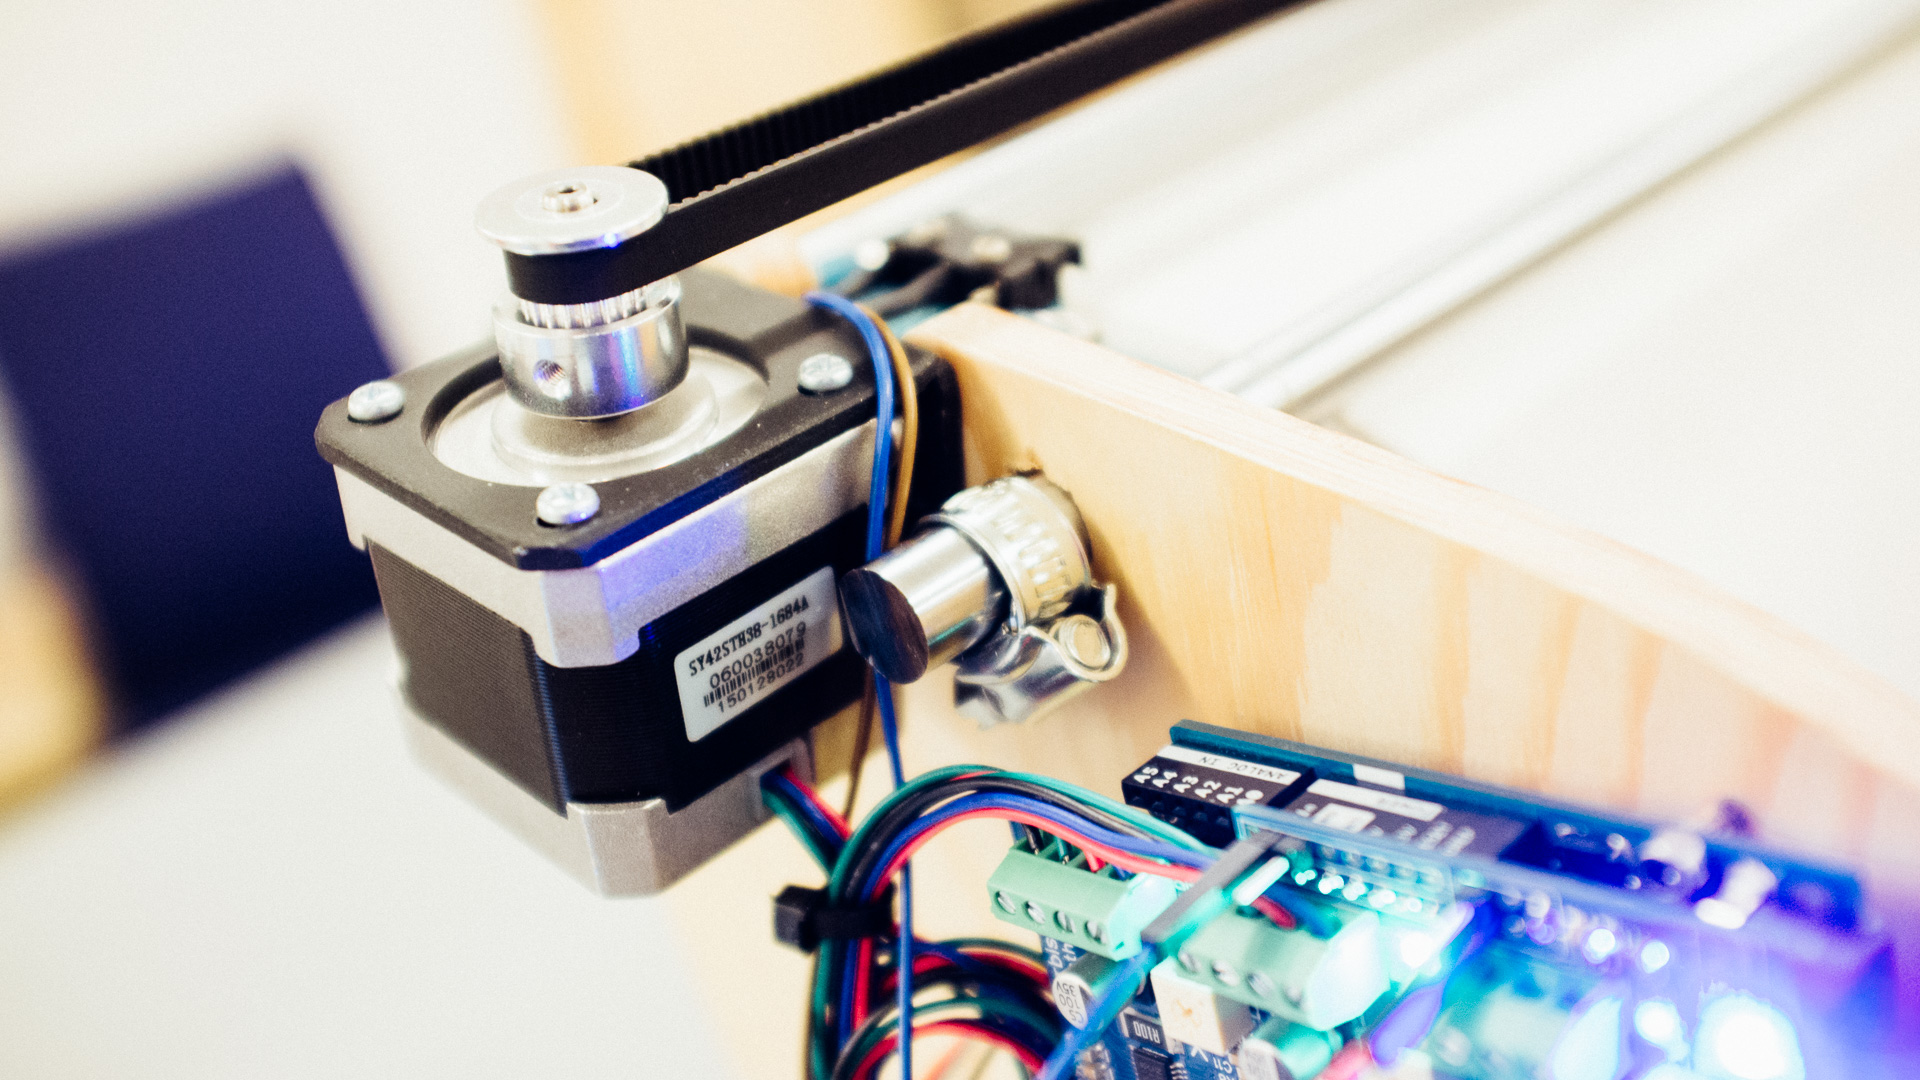 Tutorial: Calibrating Stepper Motor Machines with Belts and Pulleys ... - DSCF6735